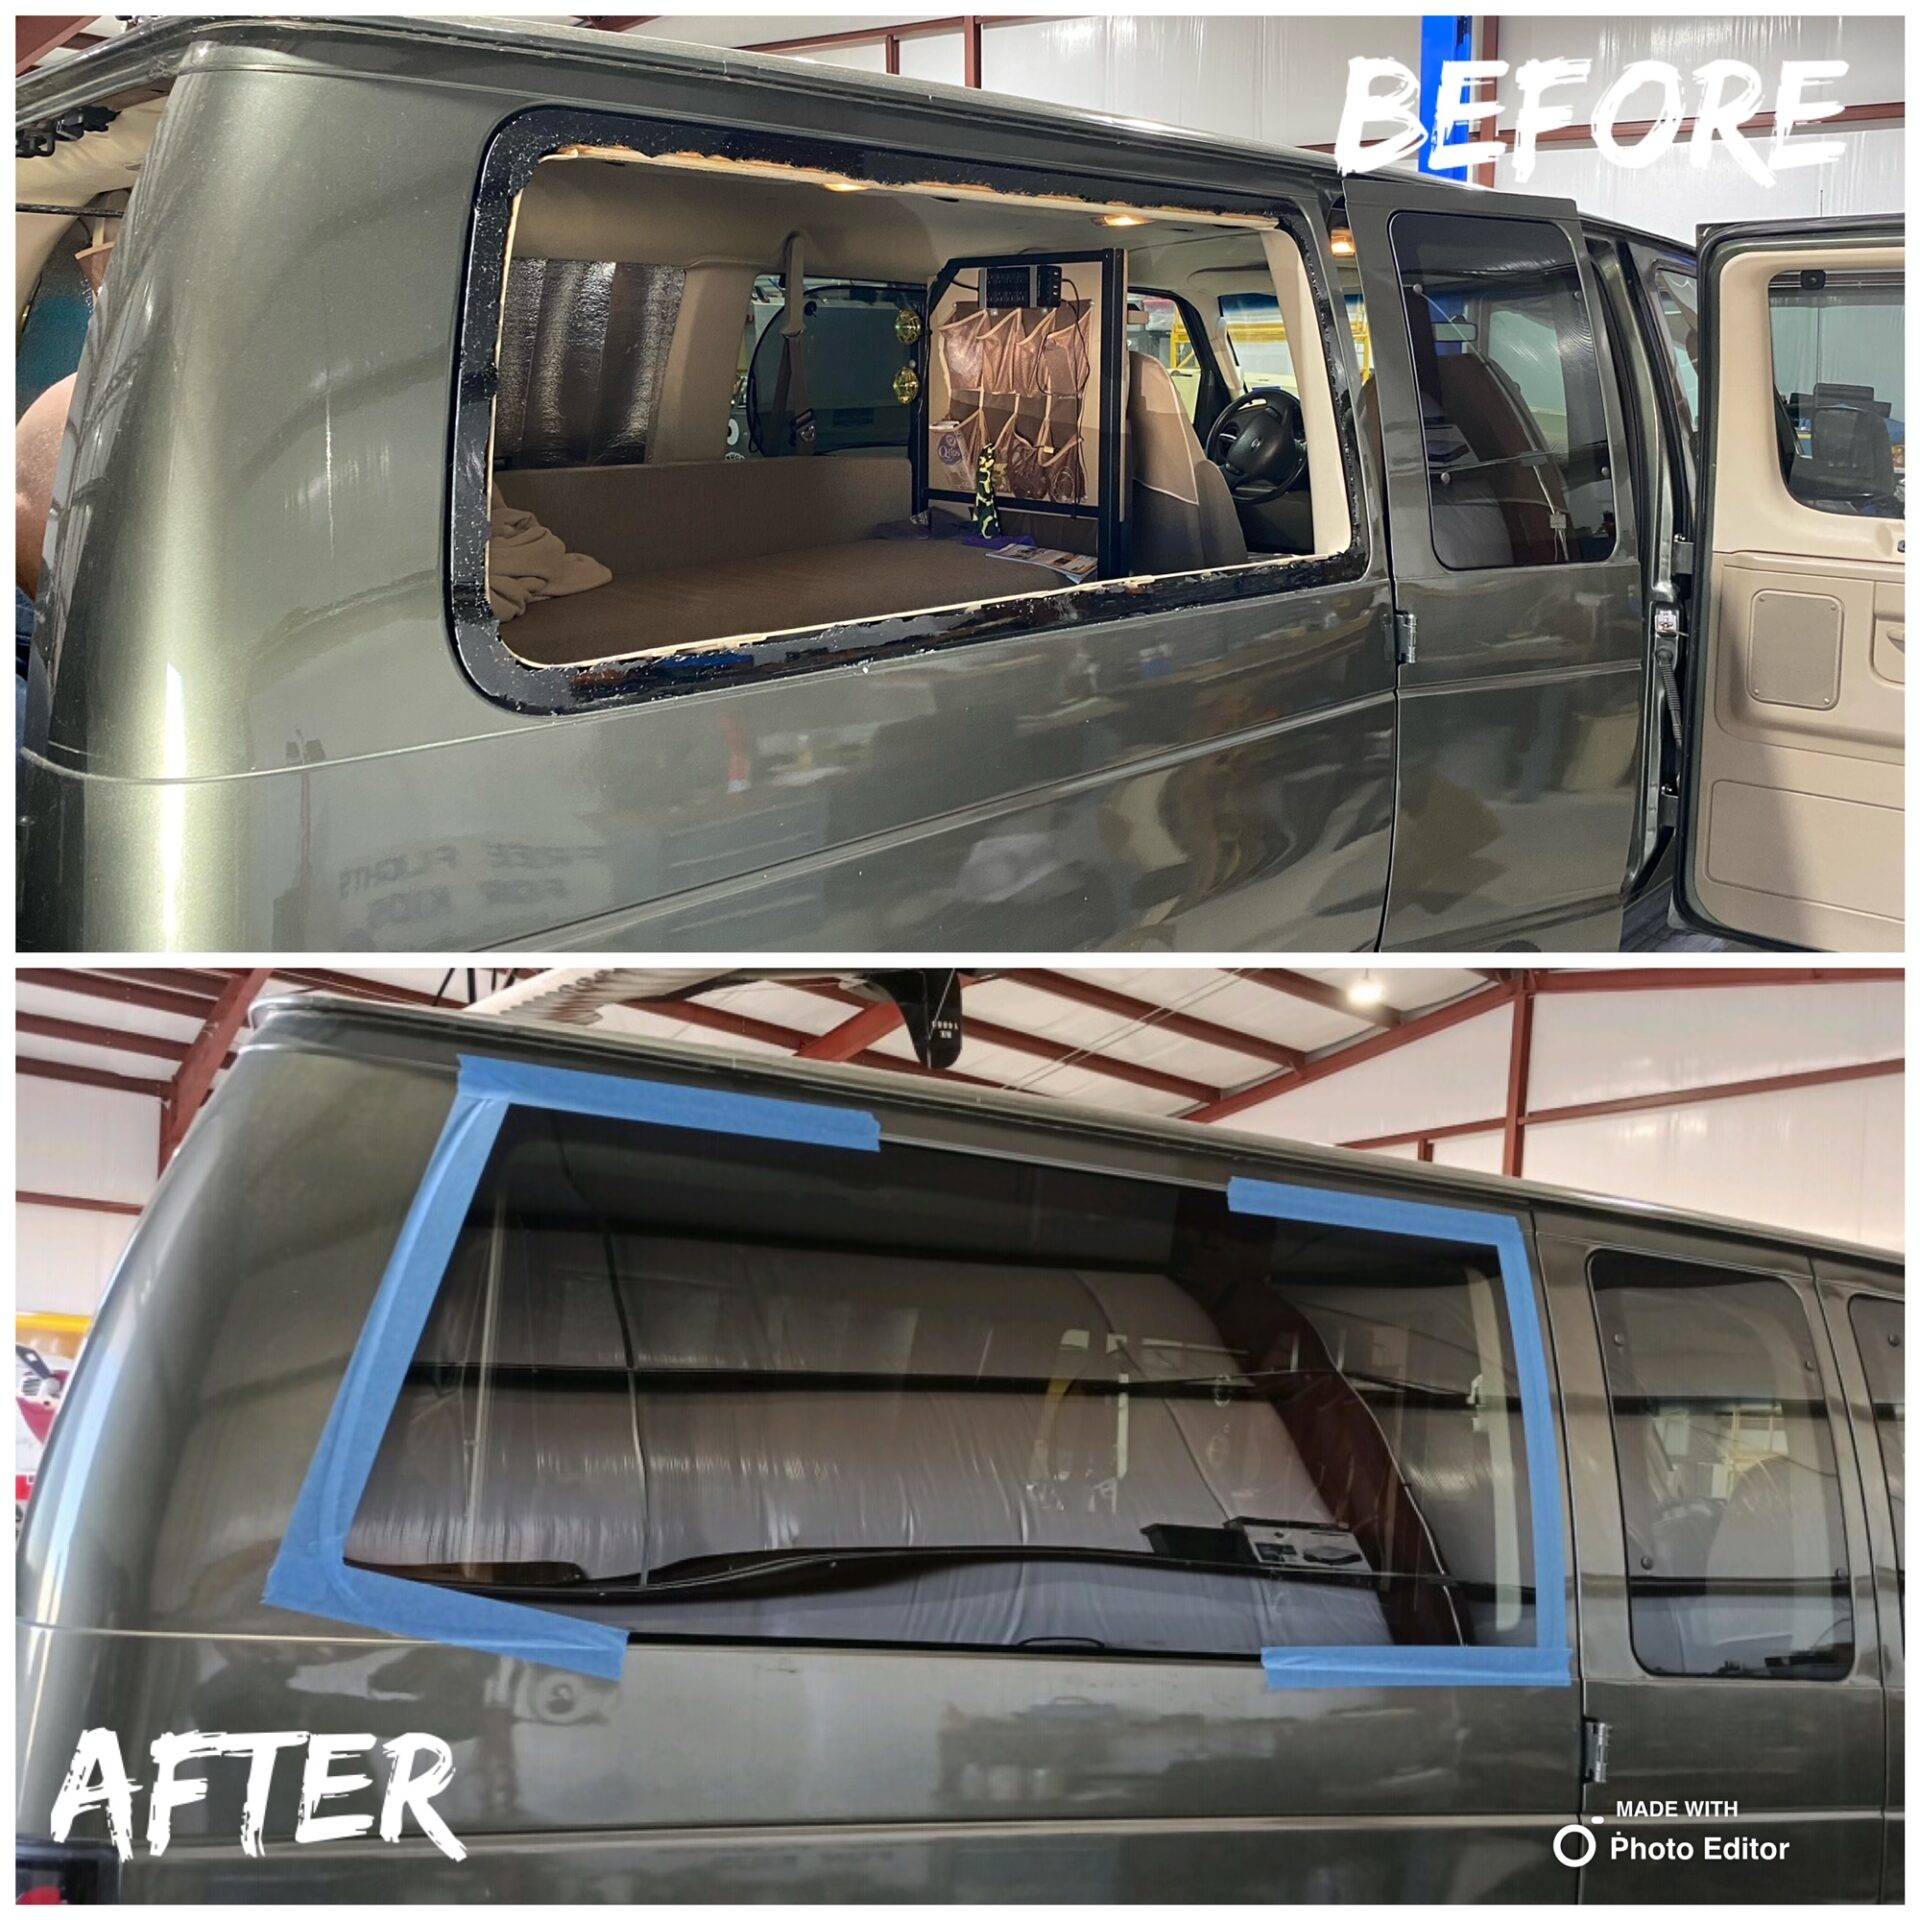 Before & after image | van quarter glass, displaying damaged state & the expert replacement.